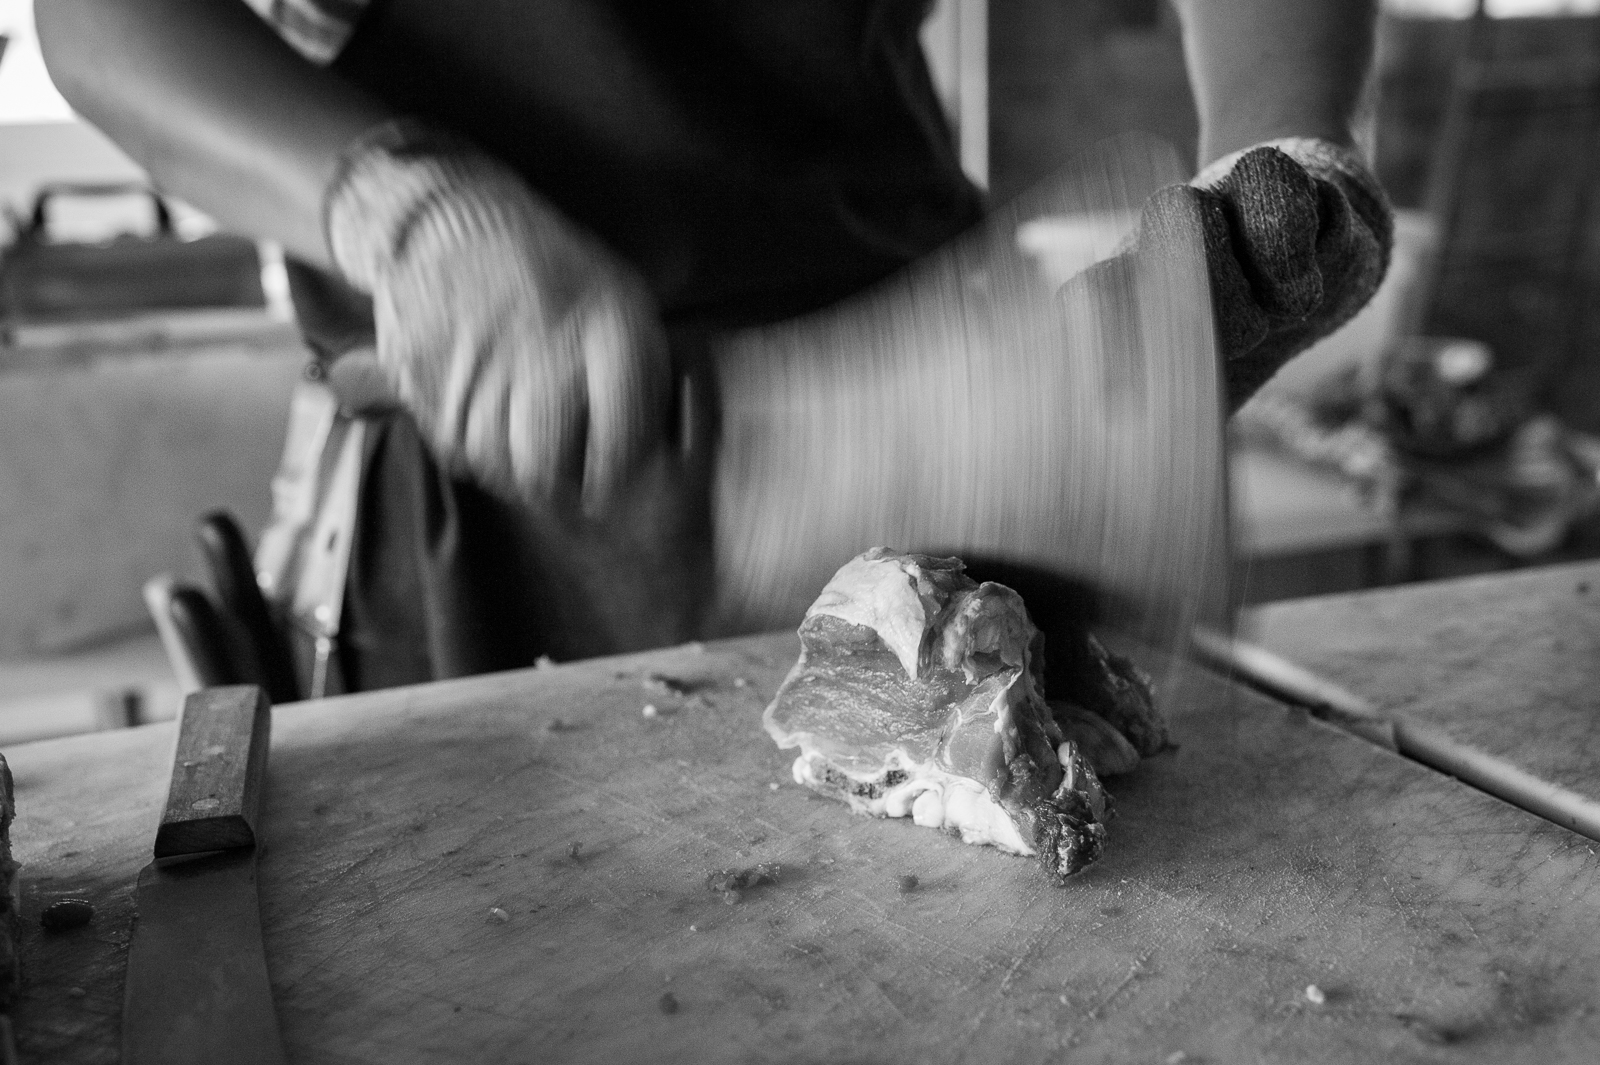 The antique cleaver in action on a cut of lamb